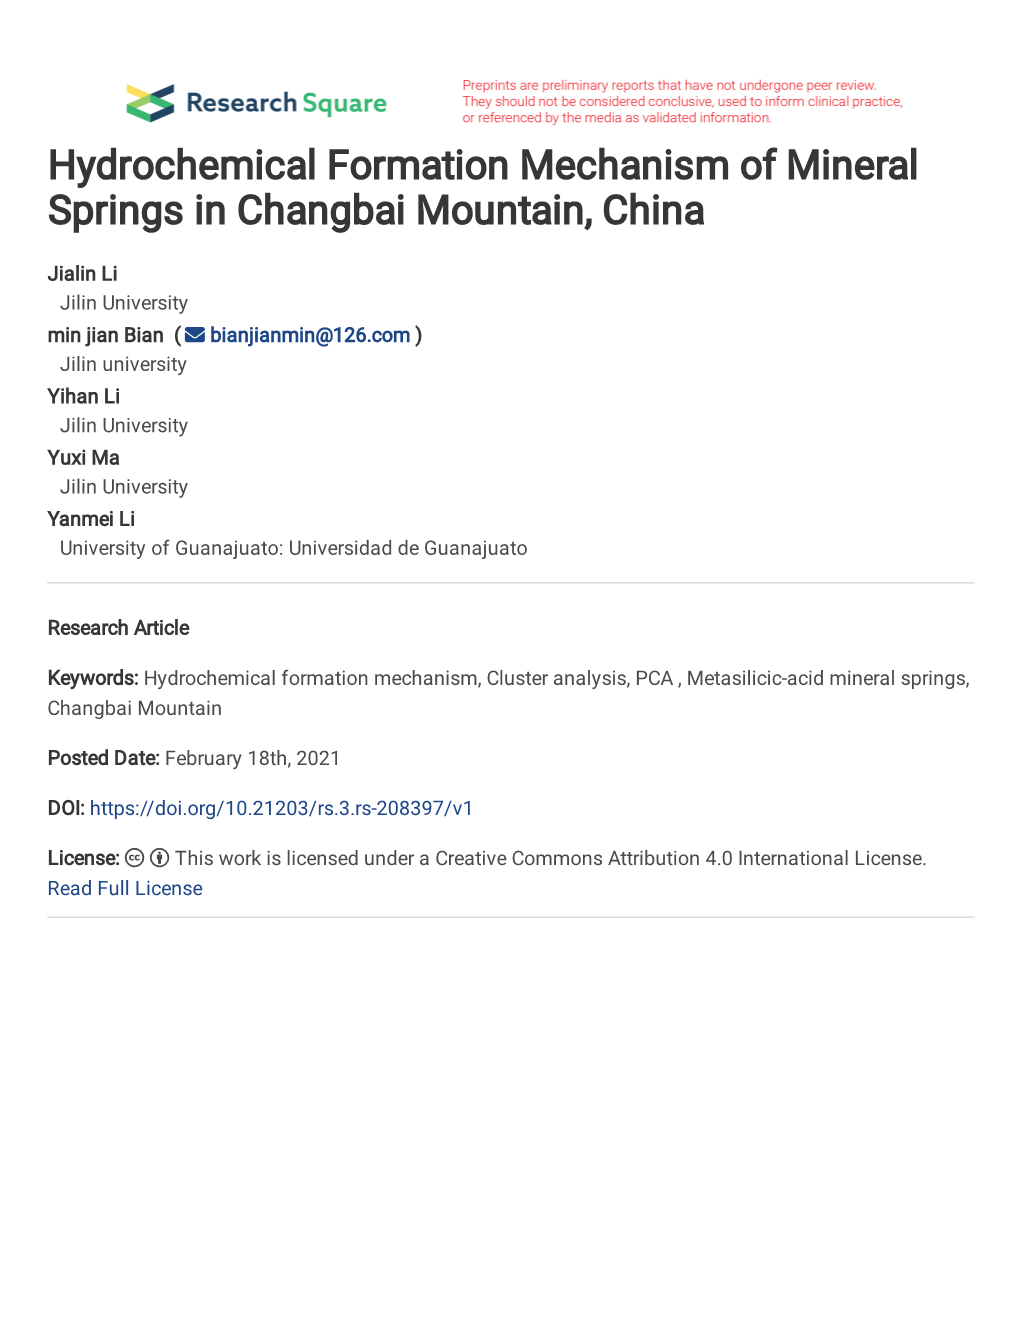 Hydrochemical Formation Mechanism of Mineral Springs in Changbai Mountain, China